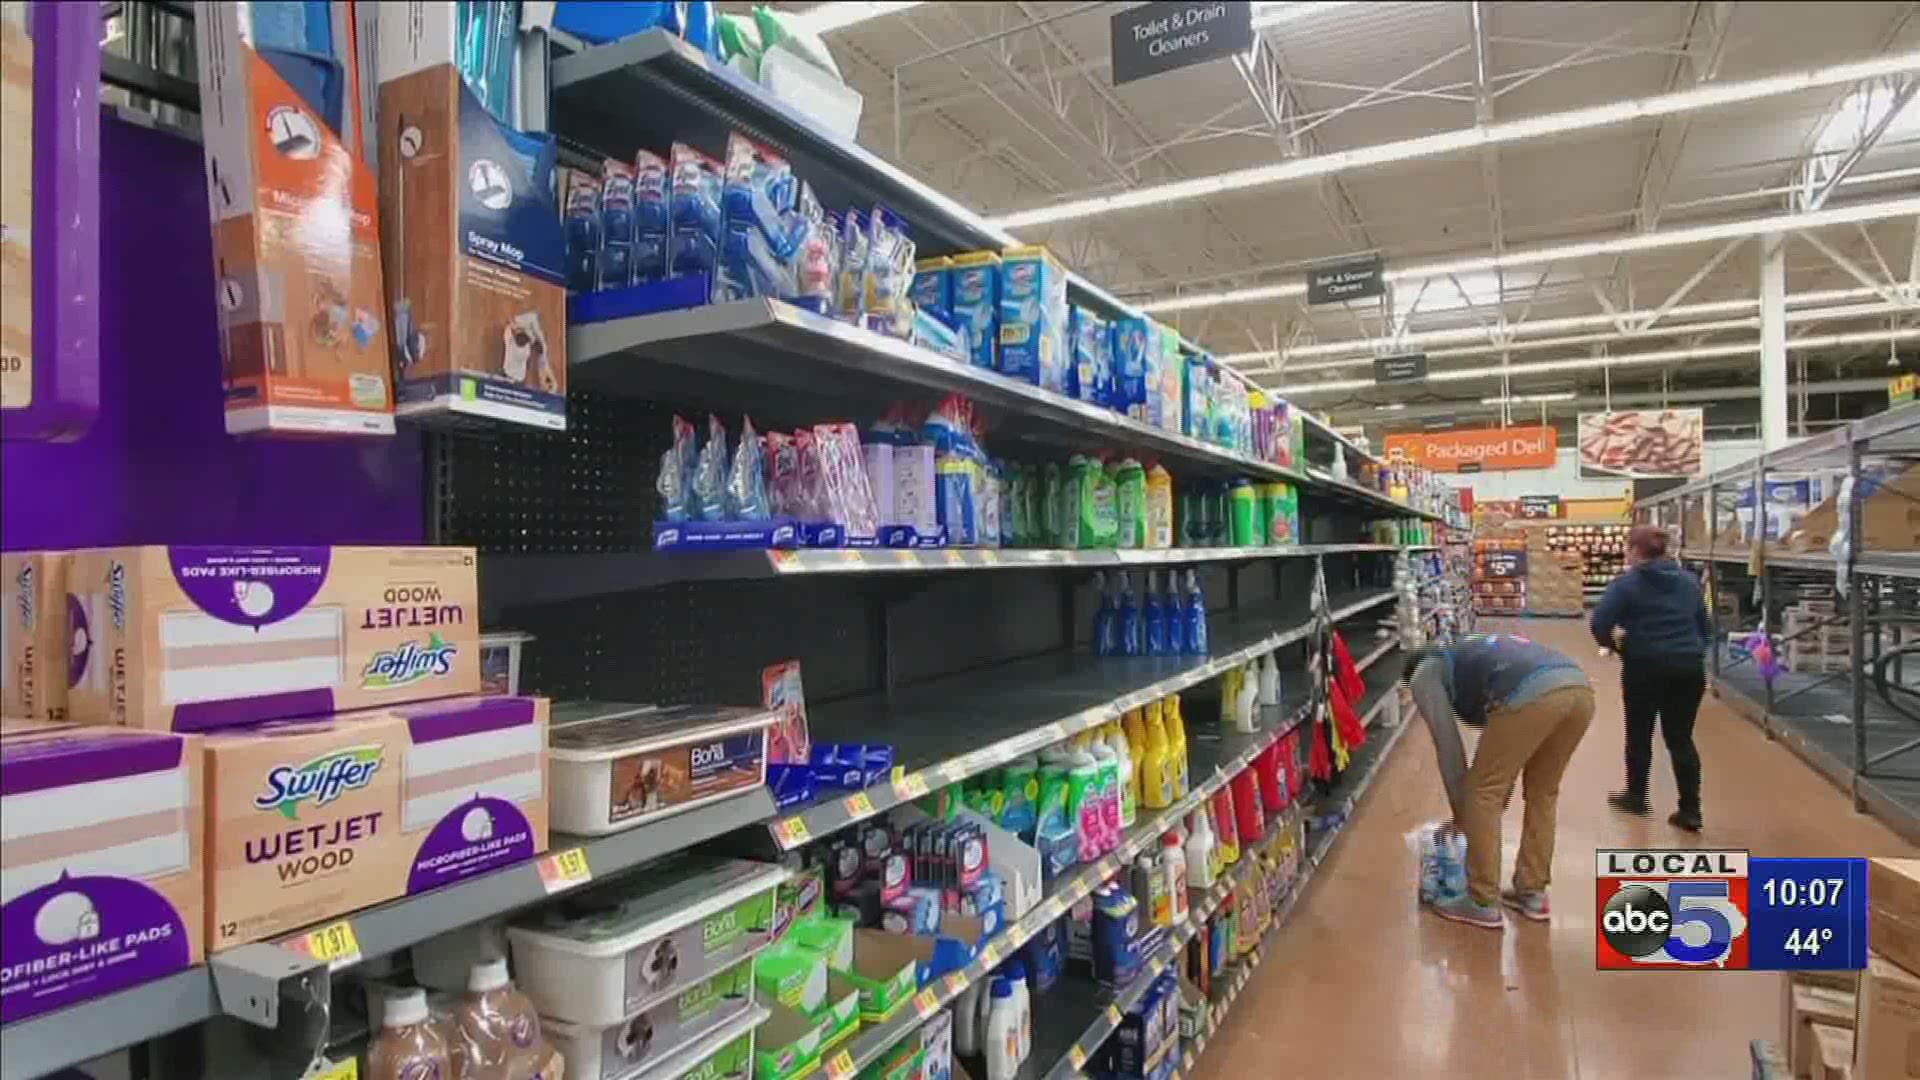 People with compromised immune systems need to have clean environments, but the recent rush to clear shelves of cleaning supplies is making this more difficult.